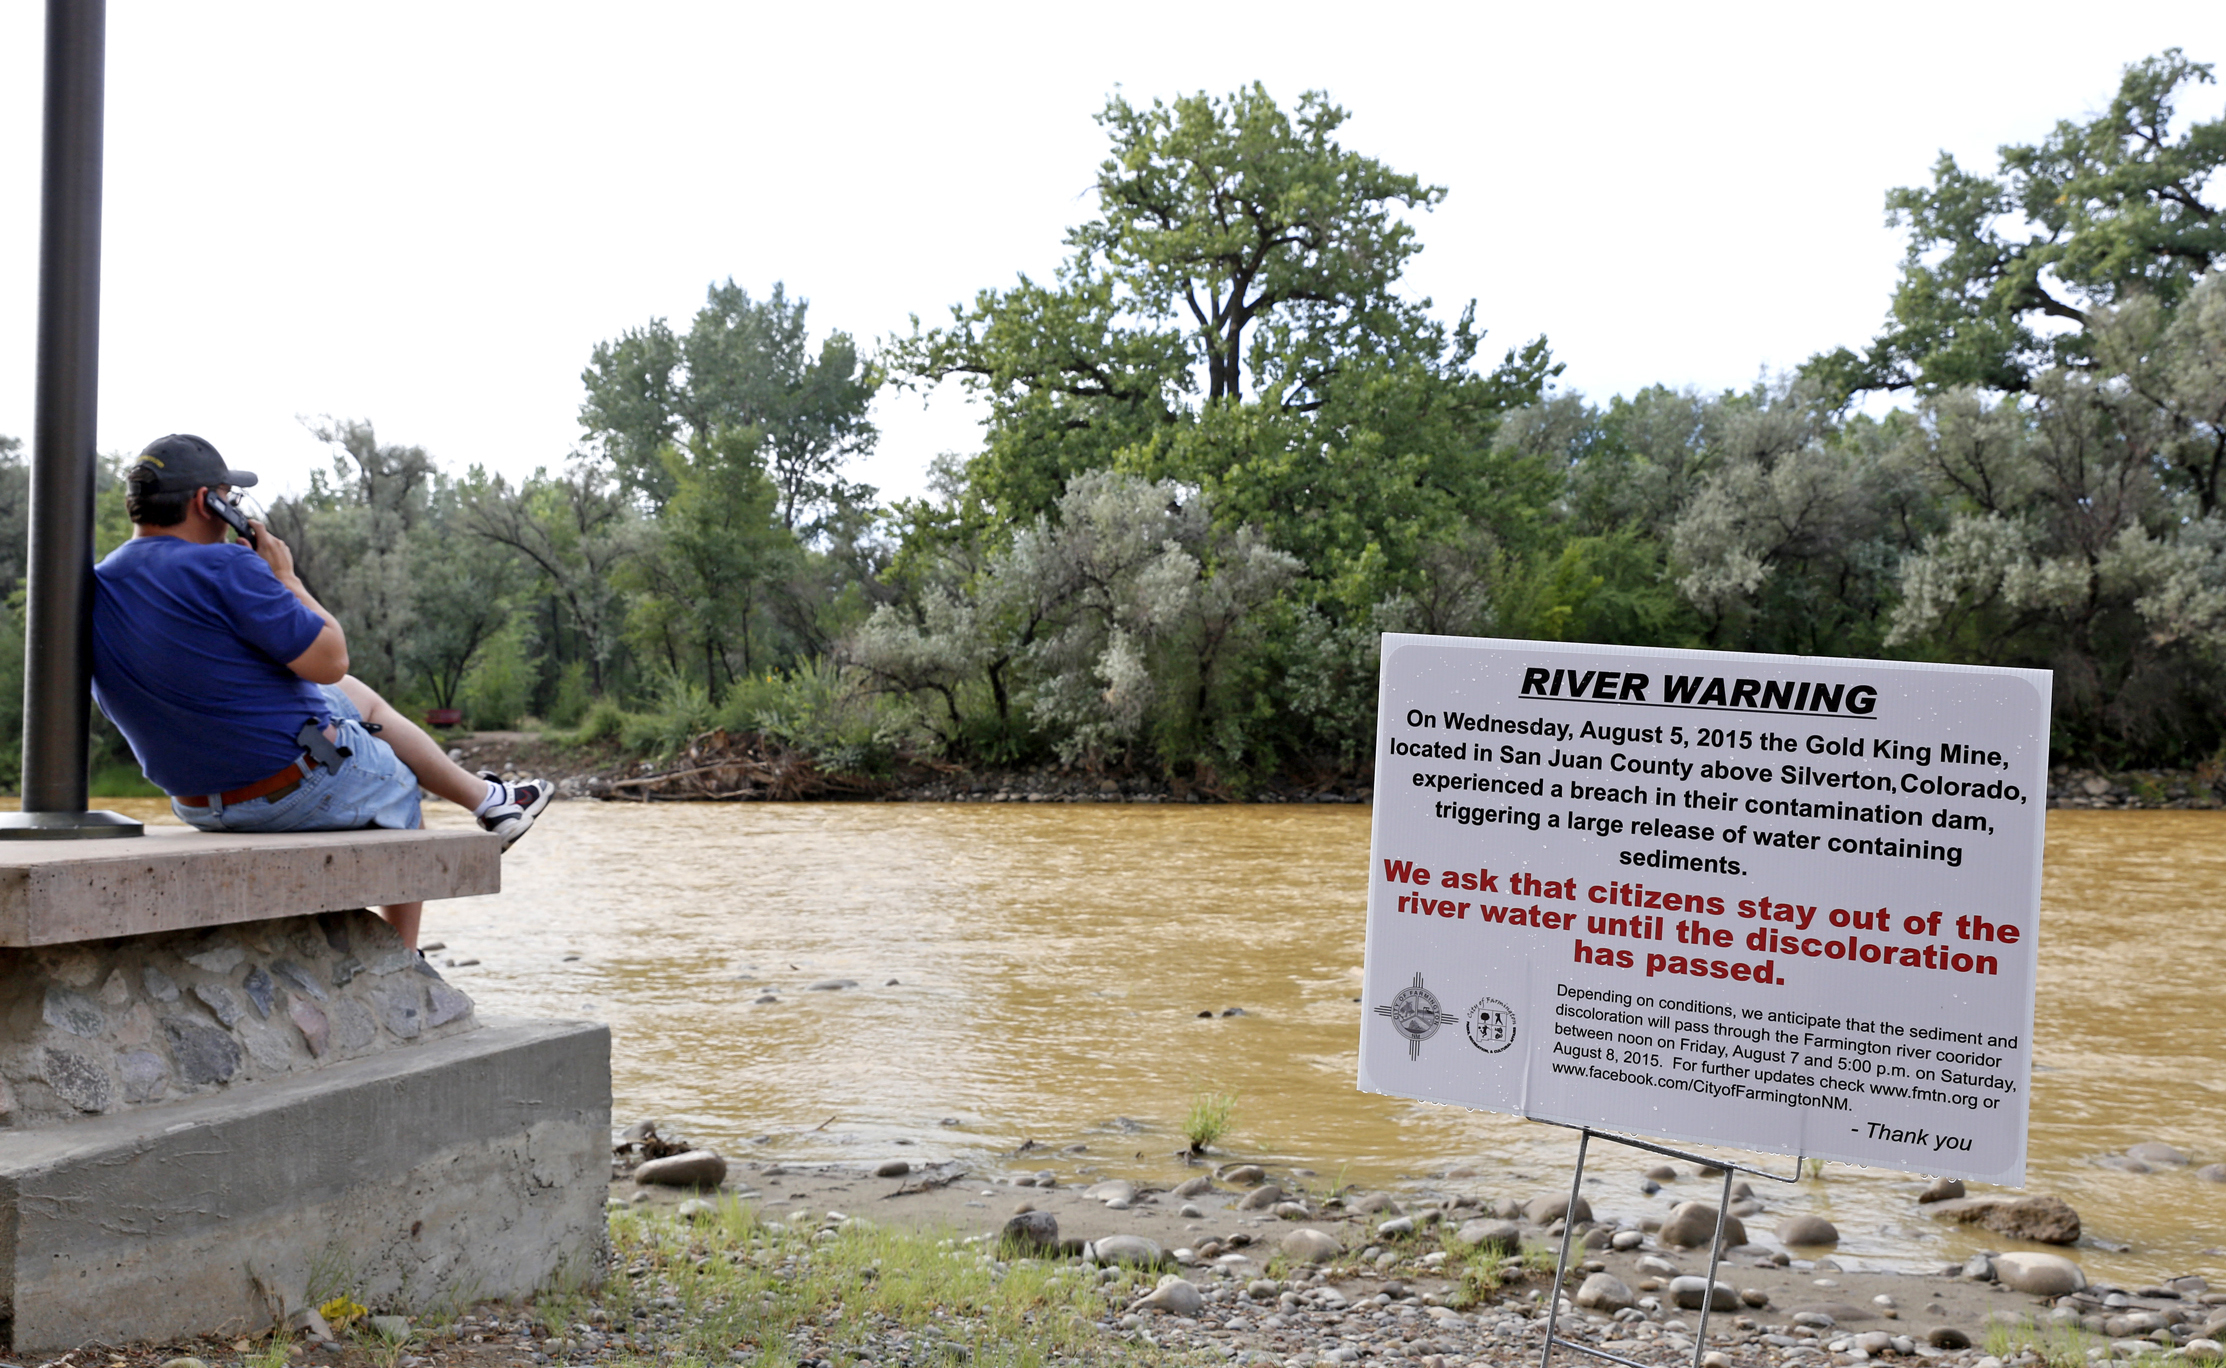 PHOTO: A warning sign from the city is displayed in front of the Animas River as orange sludge from a mine spill upstream flows past Berg Park in Farmington, N.M., Aug. 8, 2015.